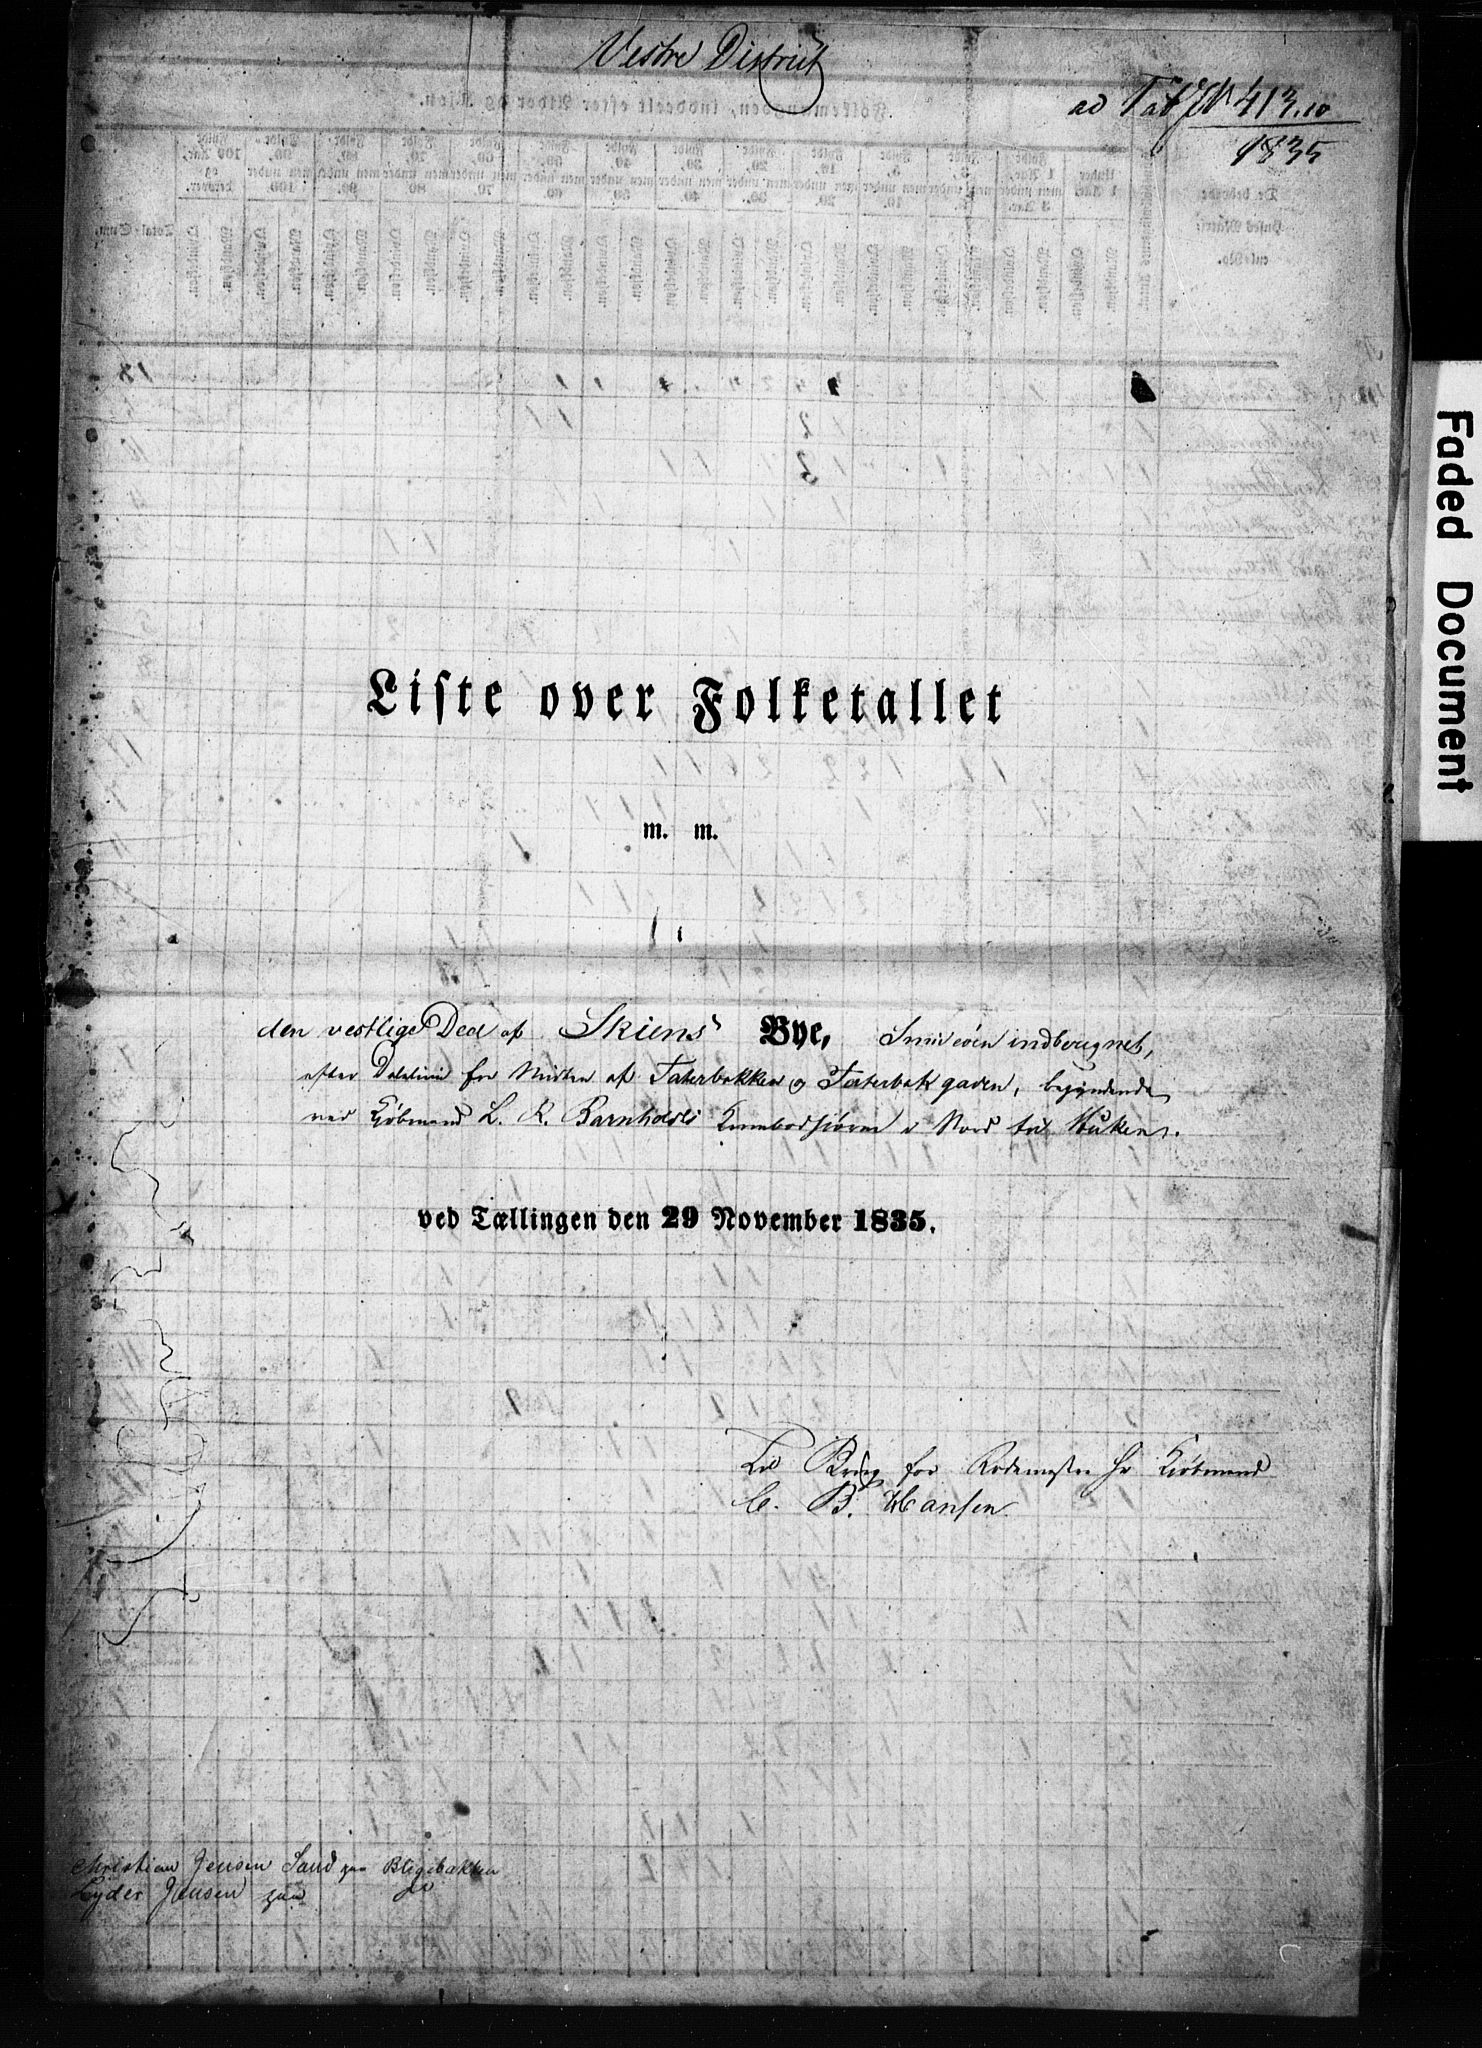 , Census 1835 for Skien, 1835, p. 1